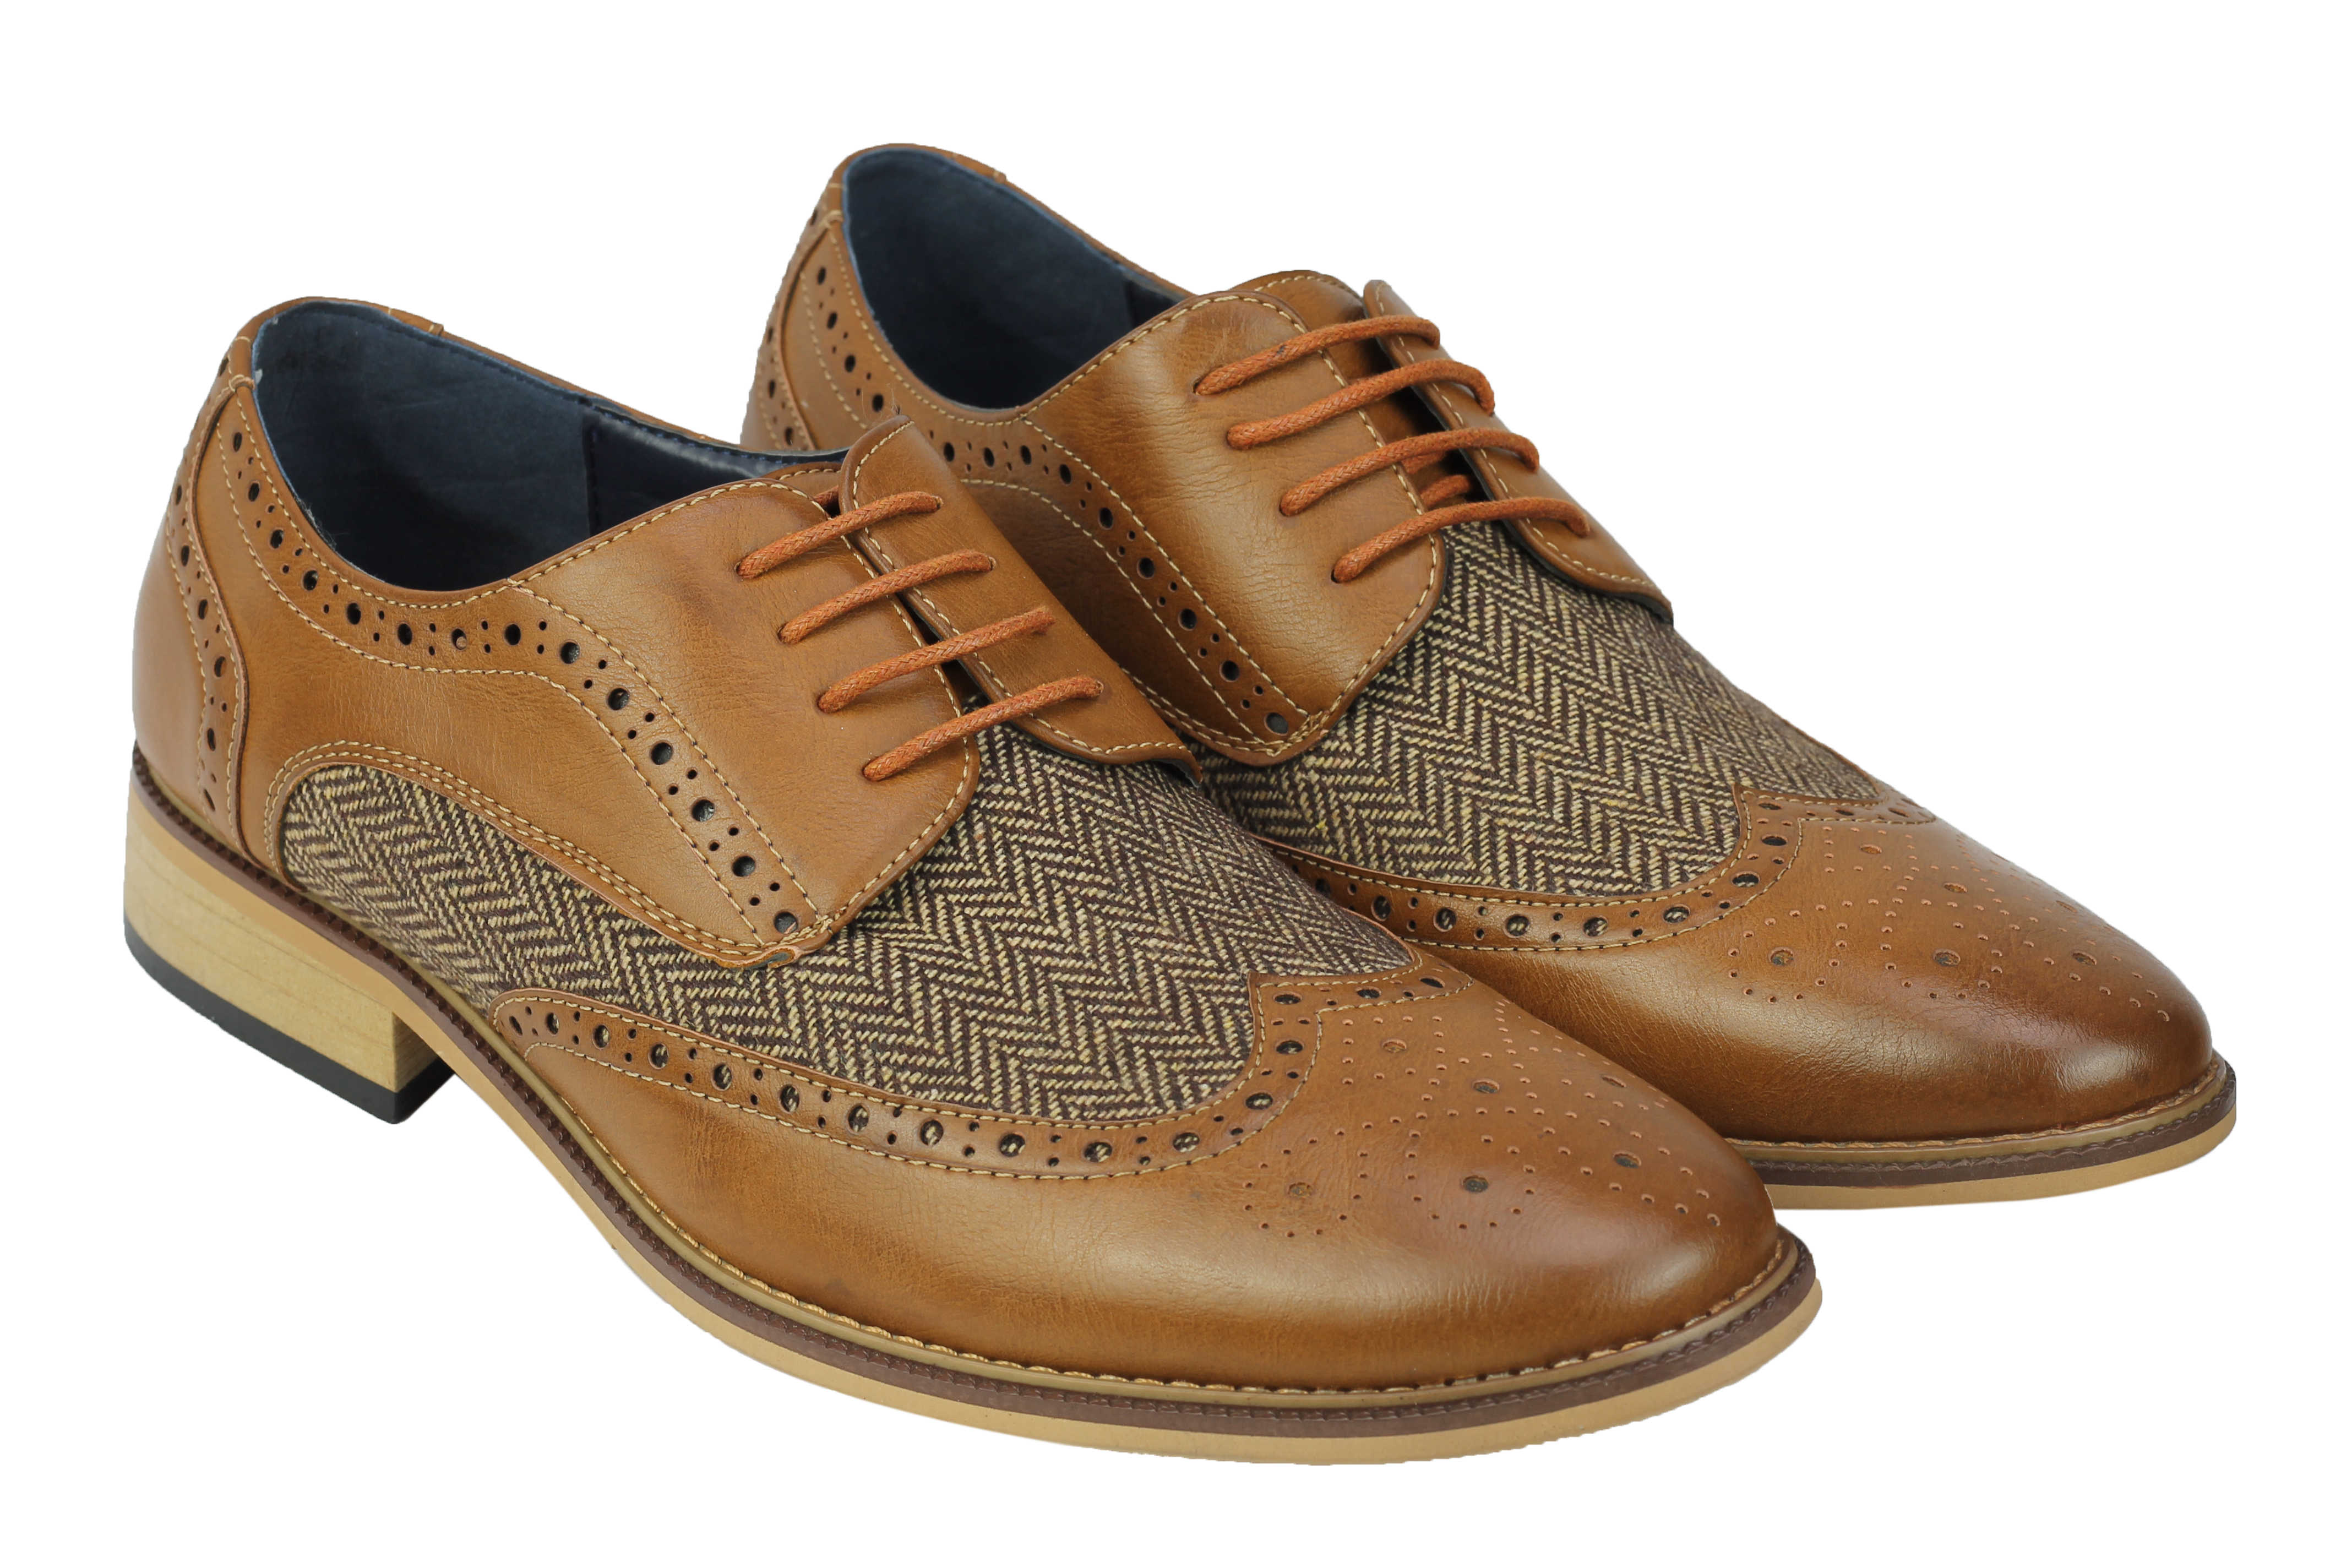 Mens Classic Gatsby Style Tweed Herringbone Formal Brogue Shoes Oxford Lace Ups